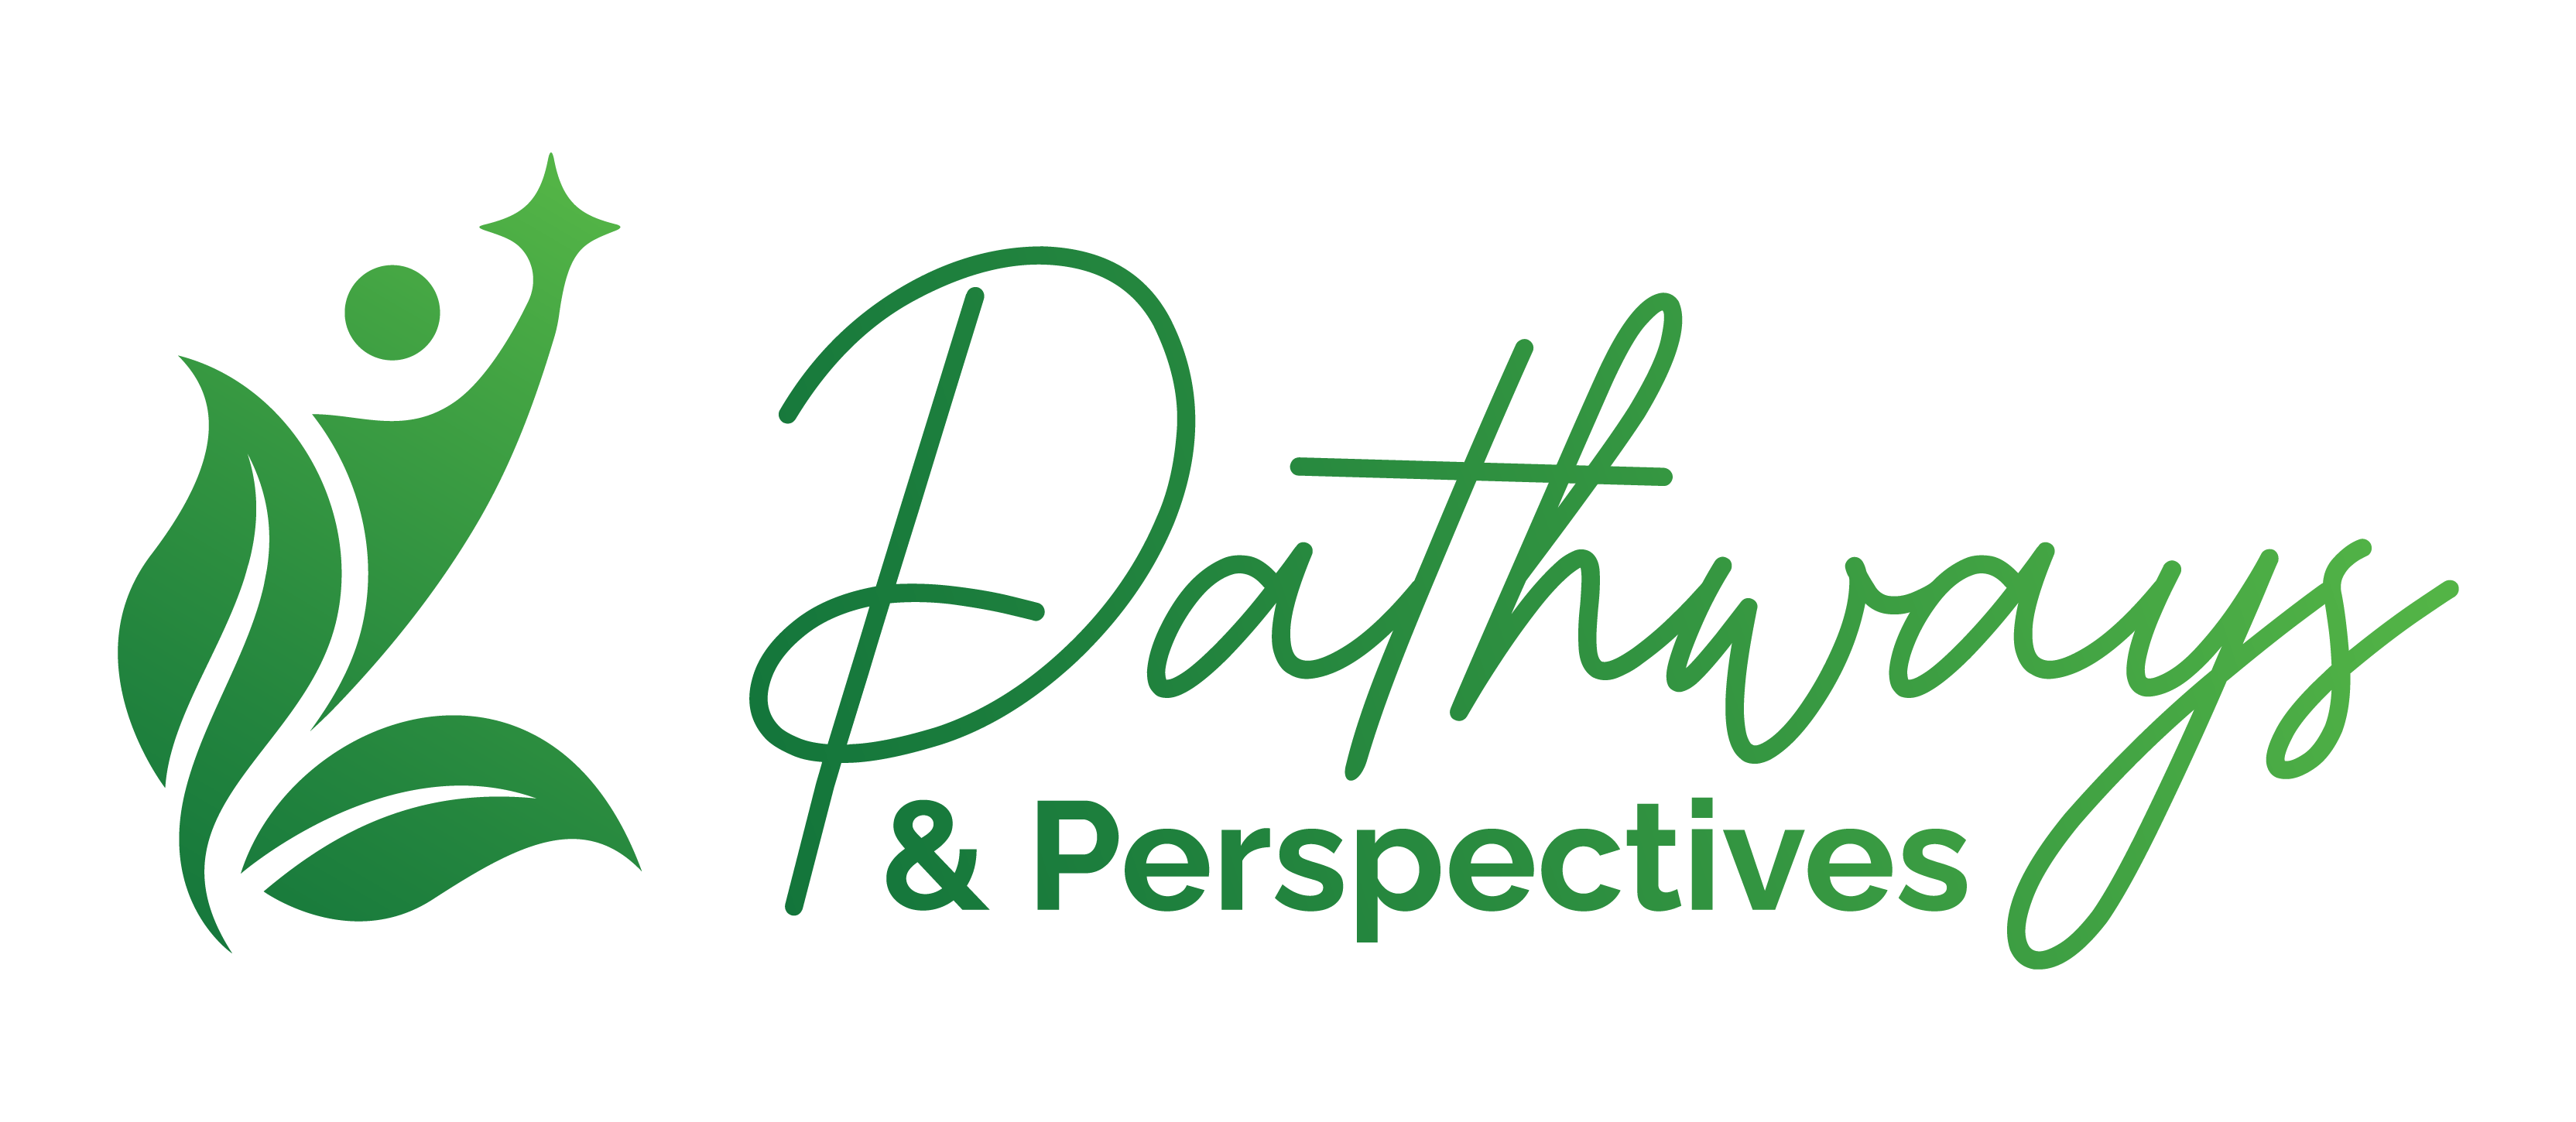 Pathways & Perspectives Counselling